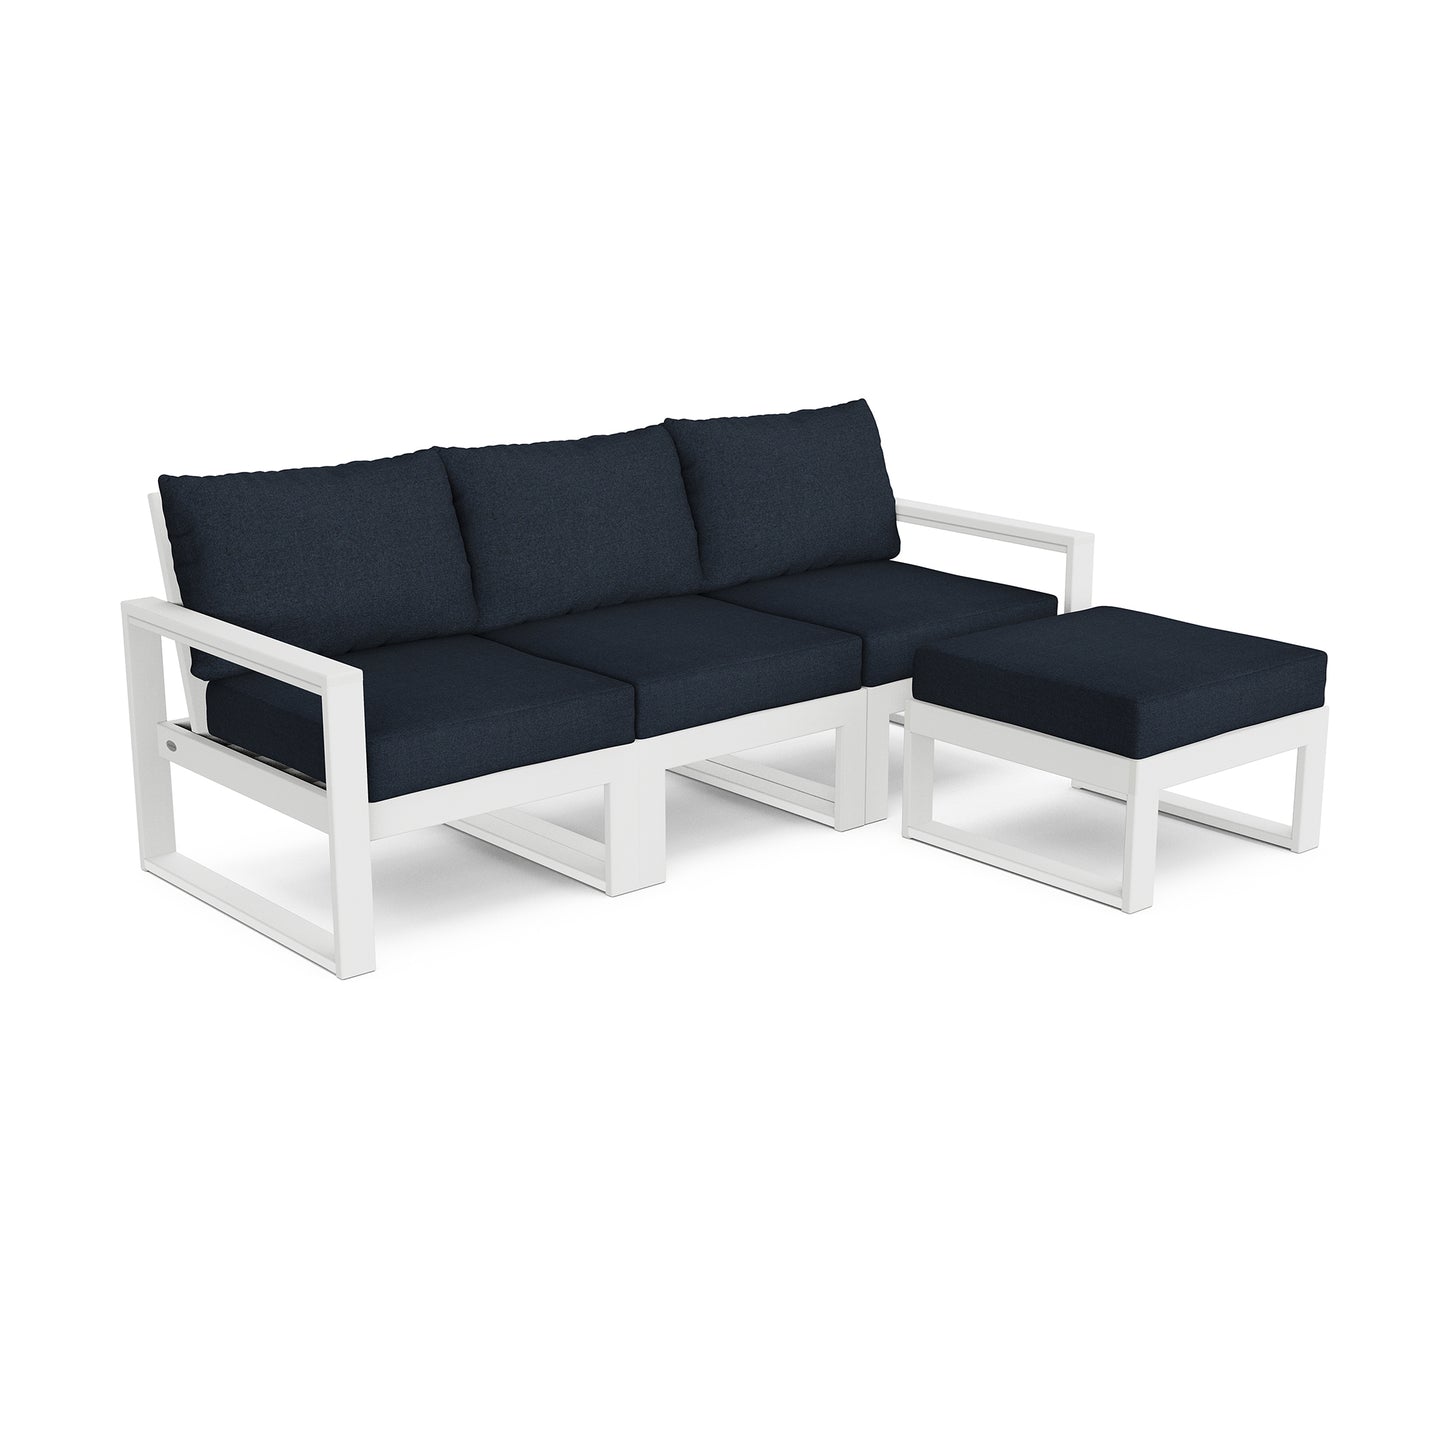 A white POLYWOOD sectional sofa with blue cushions and Ottoman, perfect for outdoor furniture.